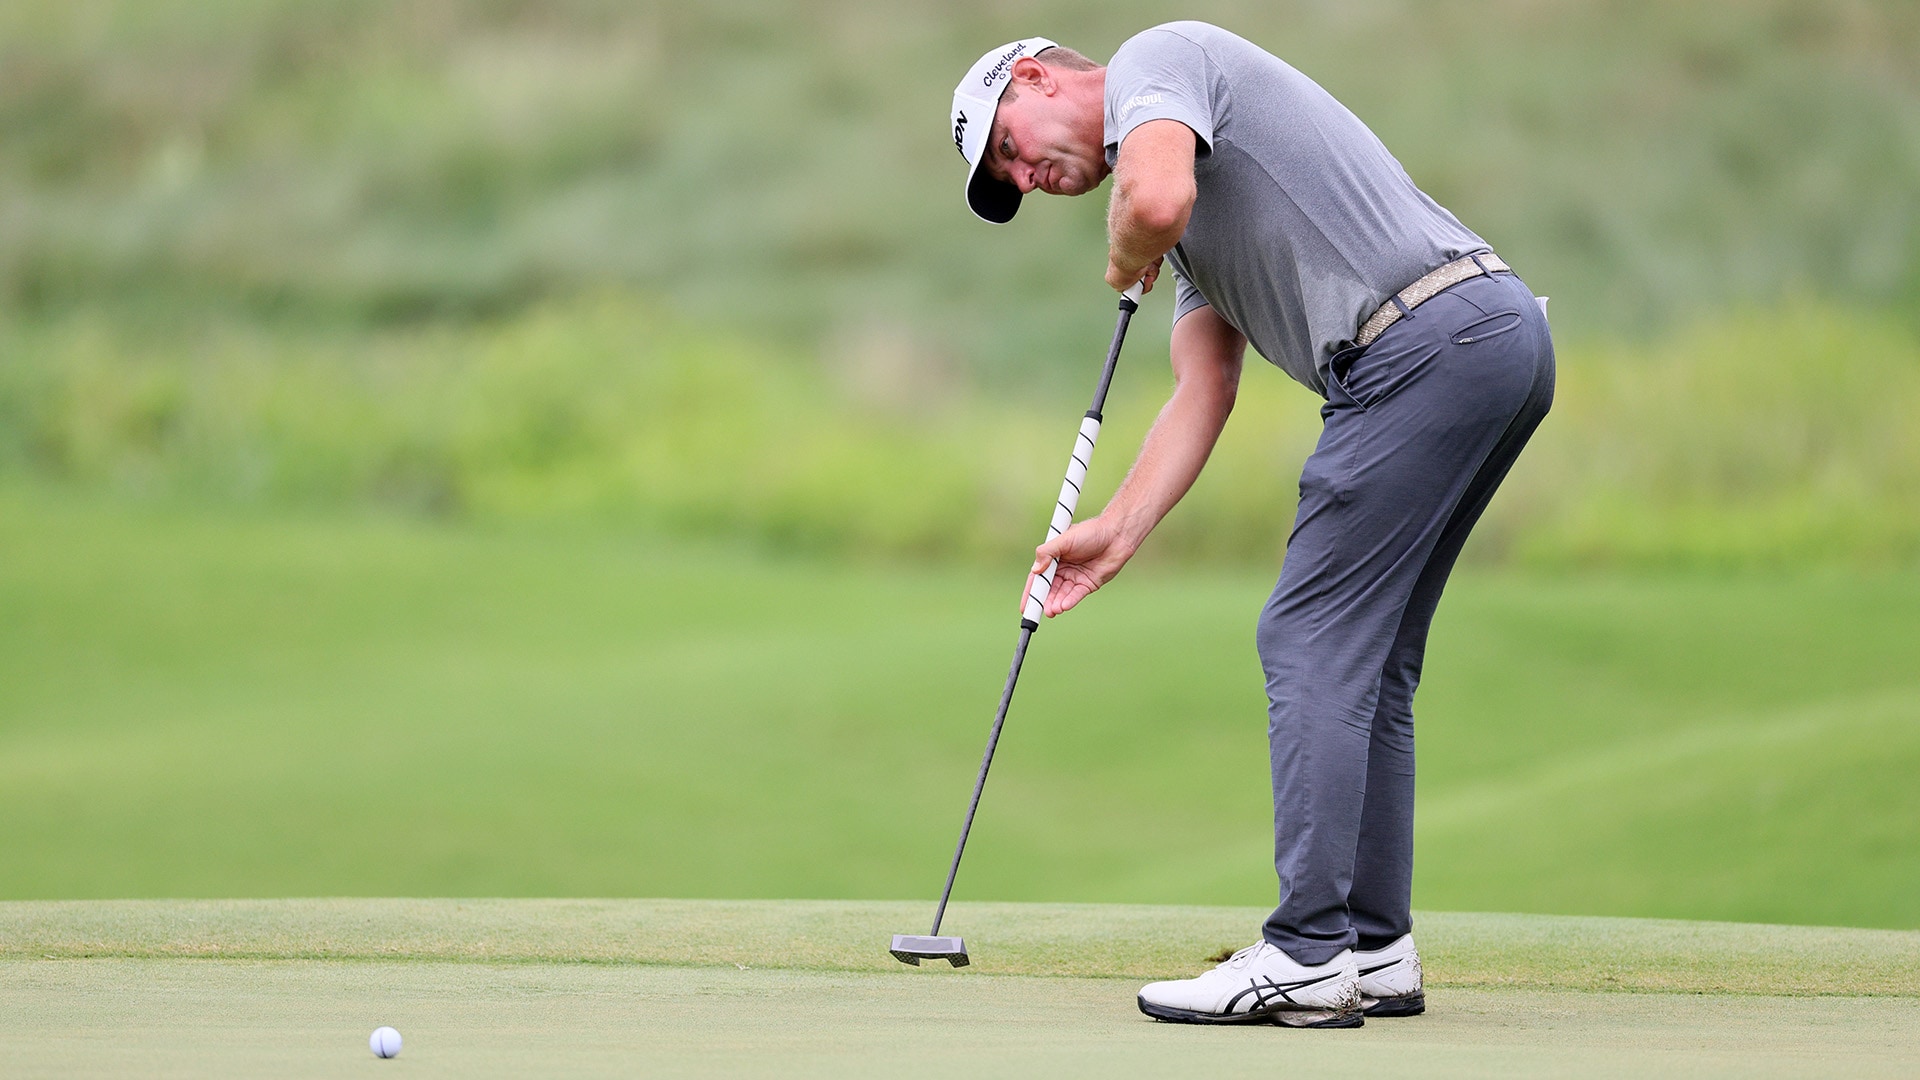 A Navy SEAL helped Lucas Glover overcome the putting yips, save career